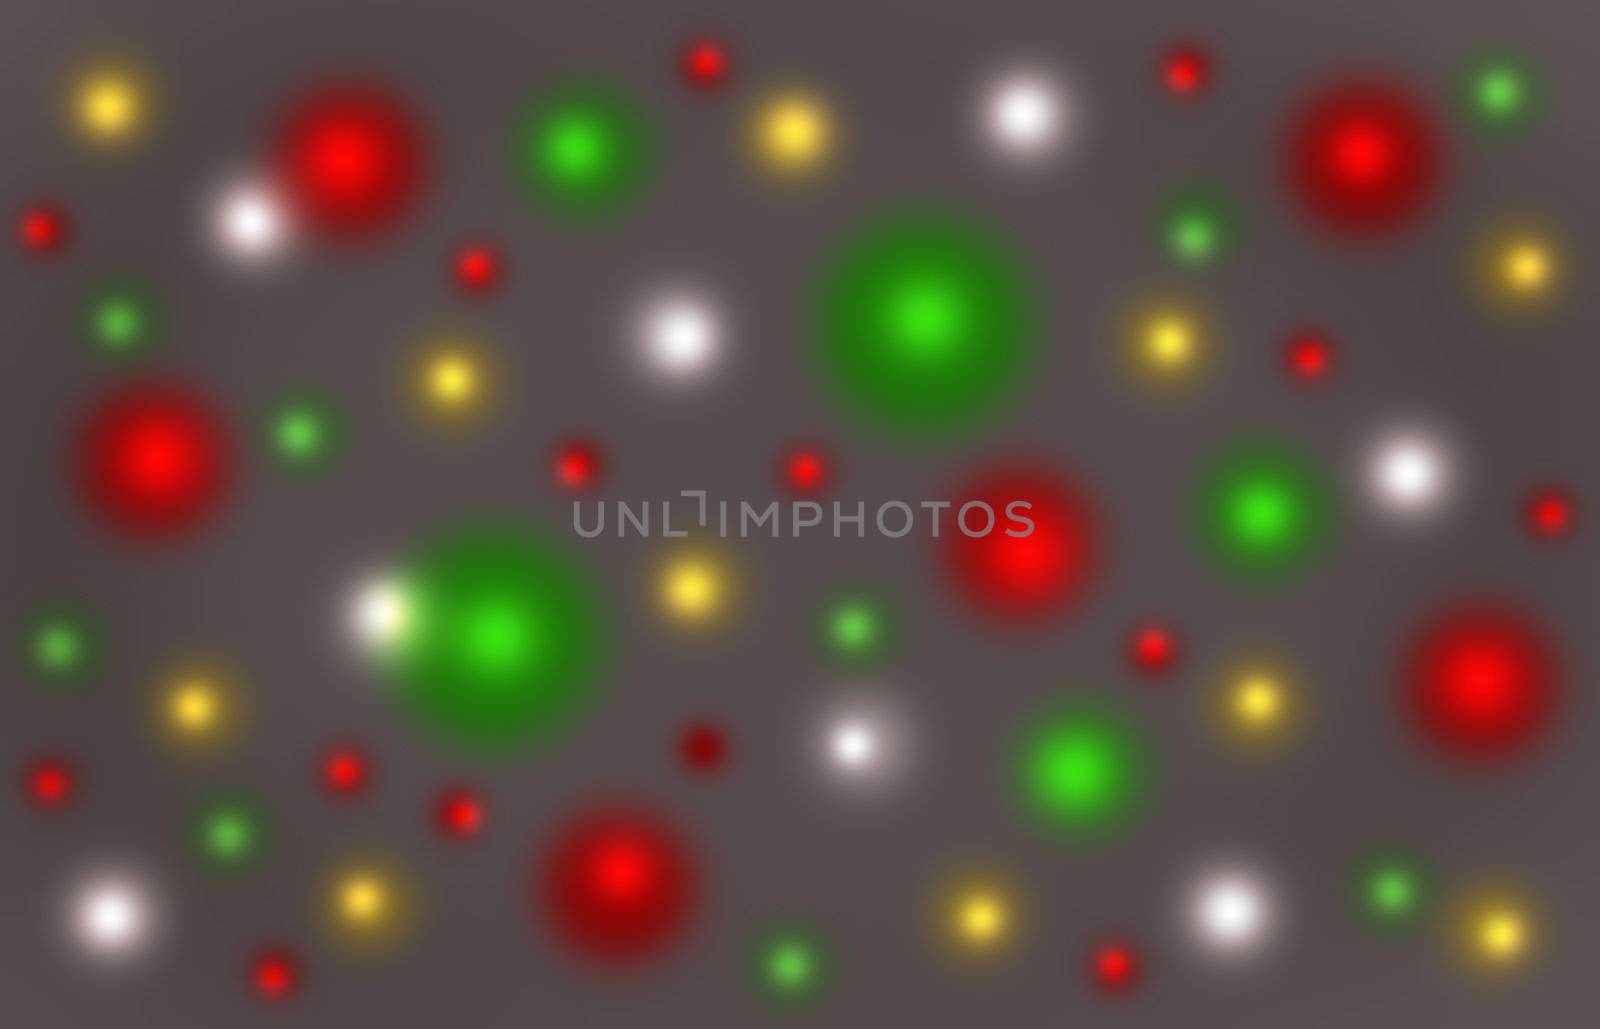 Festive blurred colorful shining background with bright colors